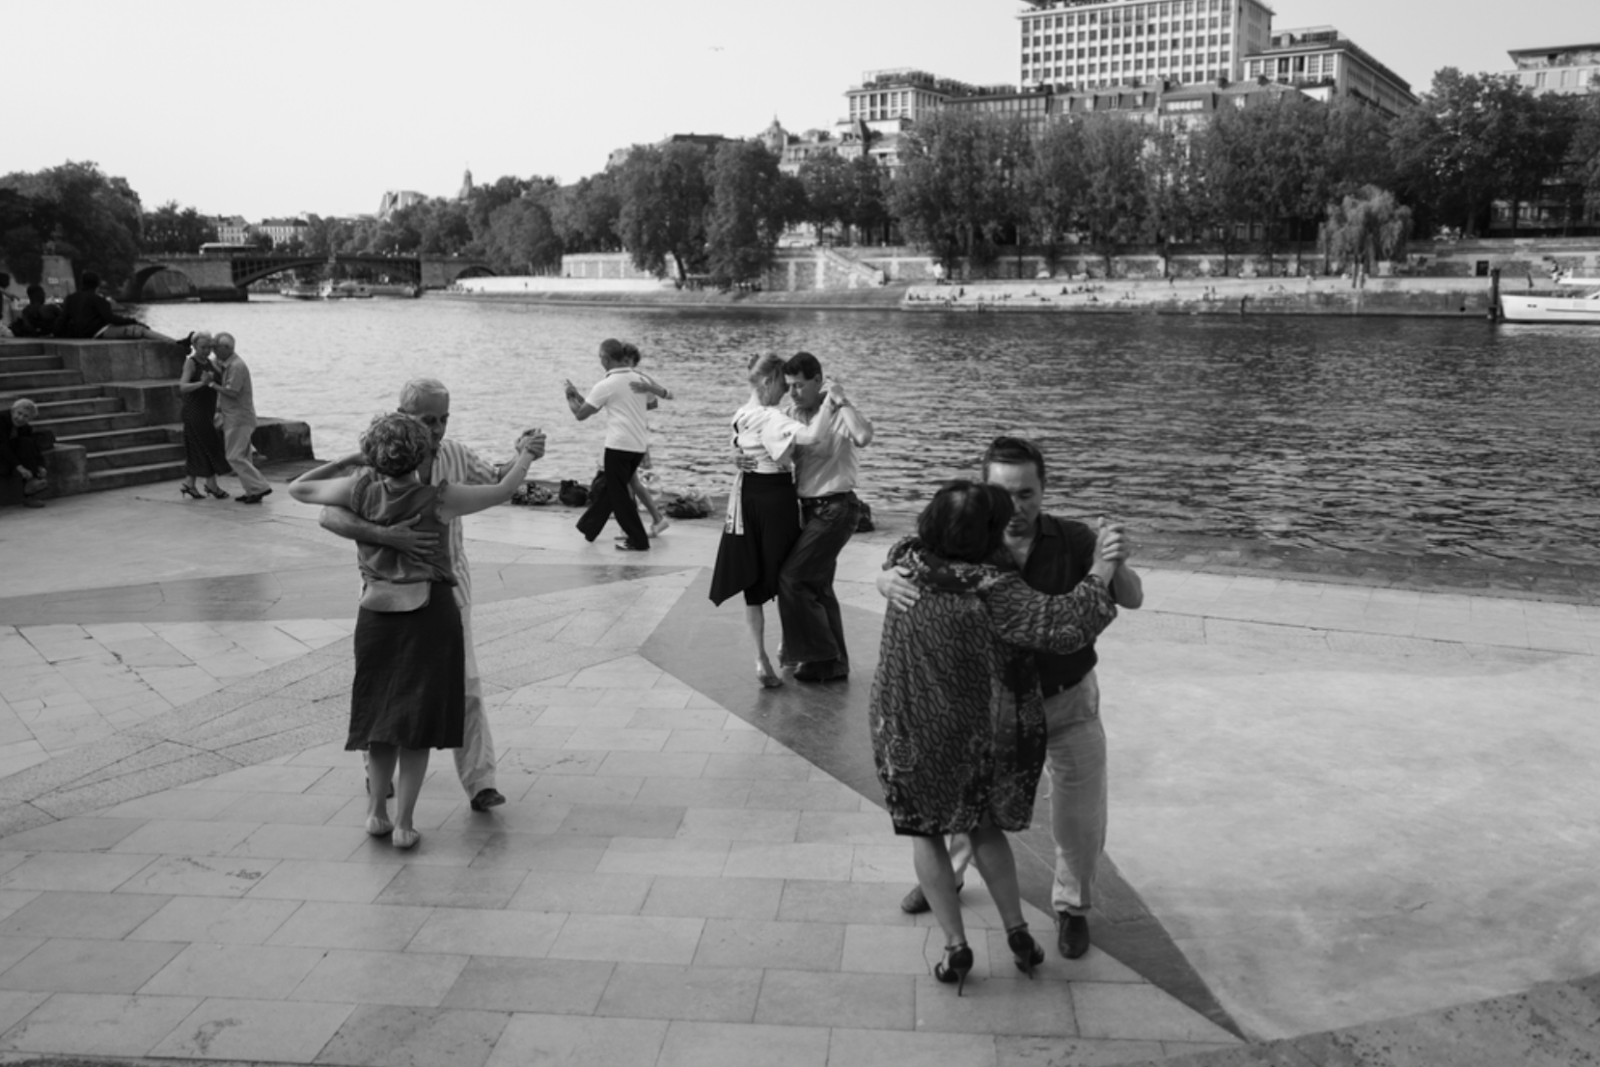 A black and white image of people dancing outside in front of a river.